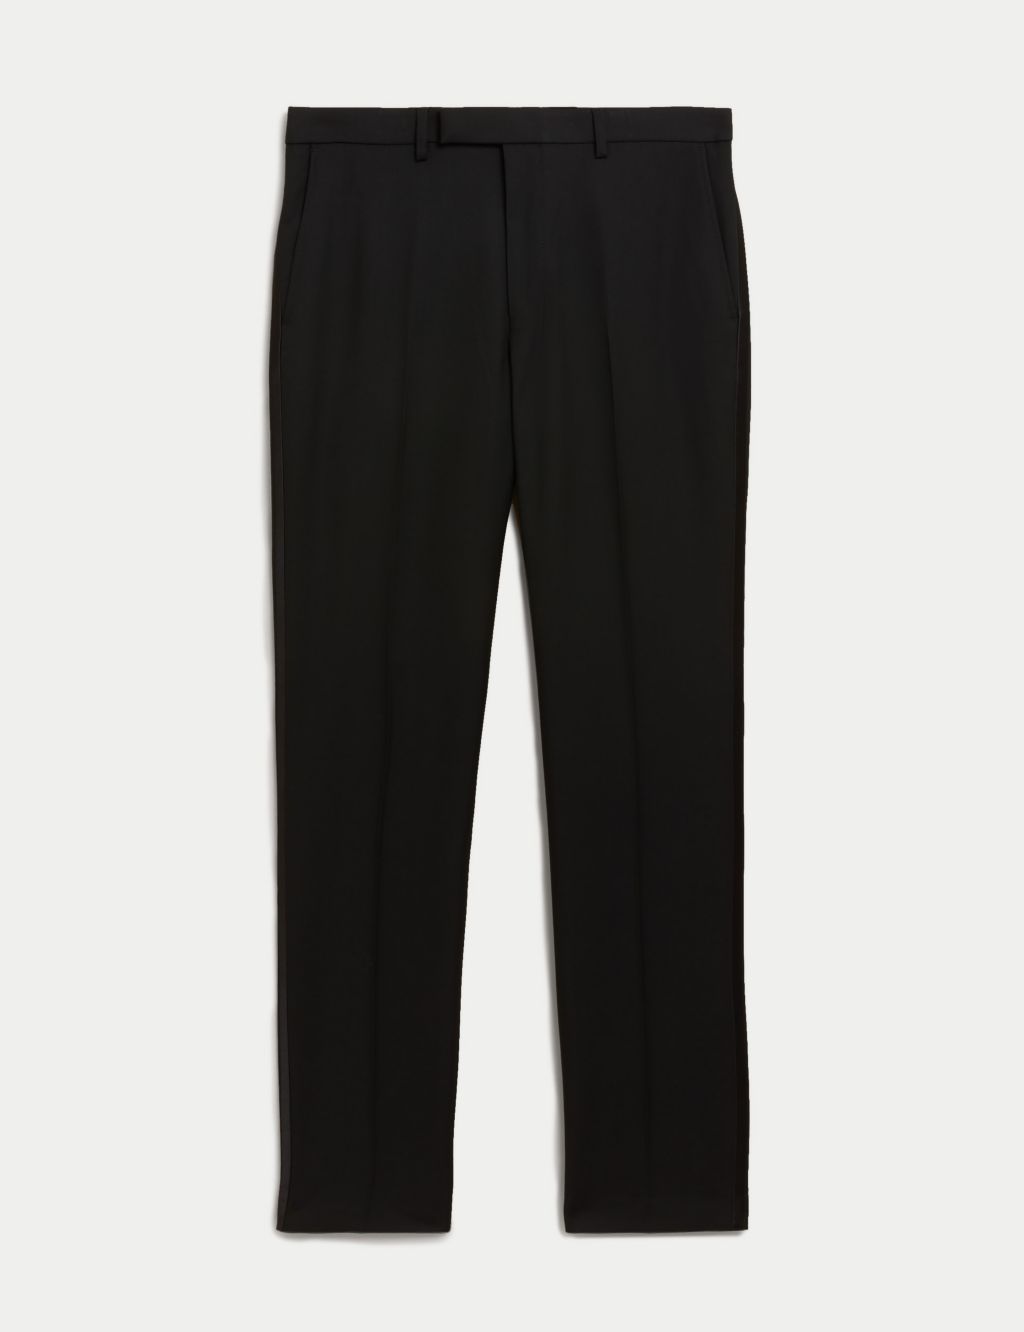 Slim Fit Flat Front Stretch Tuxedo Trousers image 1